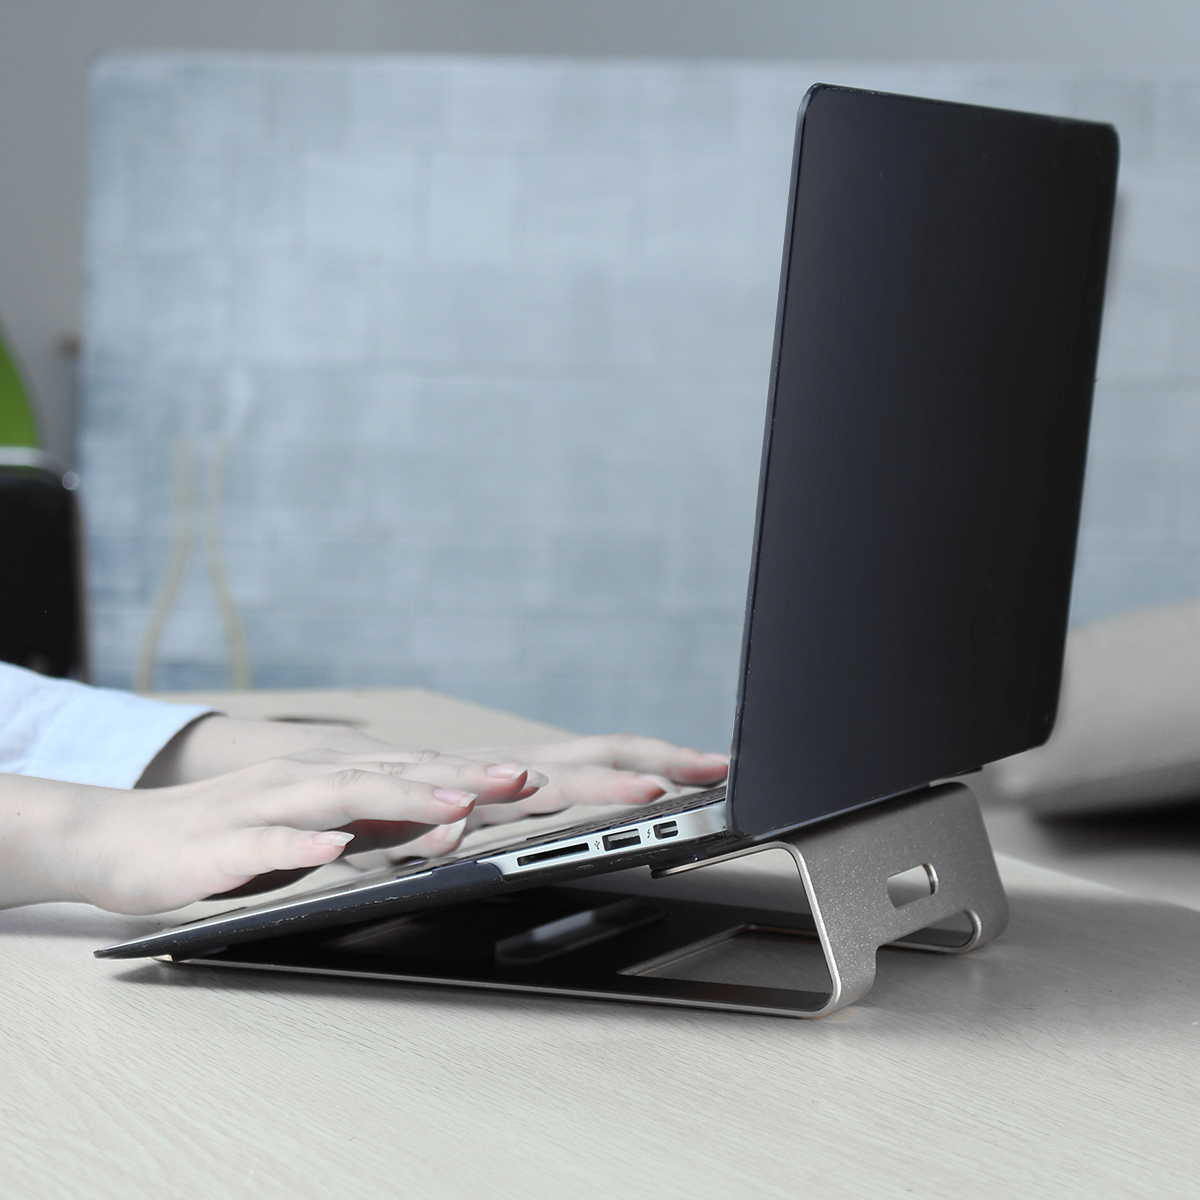 Universal-Aluminum-Alloy-Heat-Dissipation-Laptop-Stand-Tablet-Holder-for-Macbook-iPad--iPhone-1165837-2